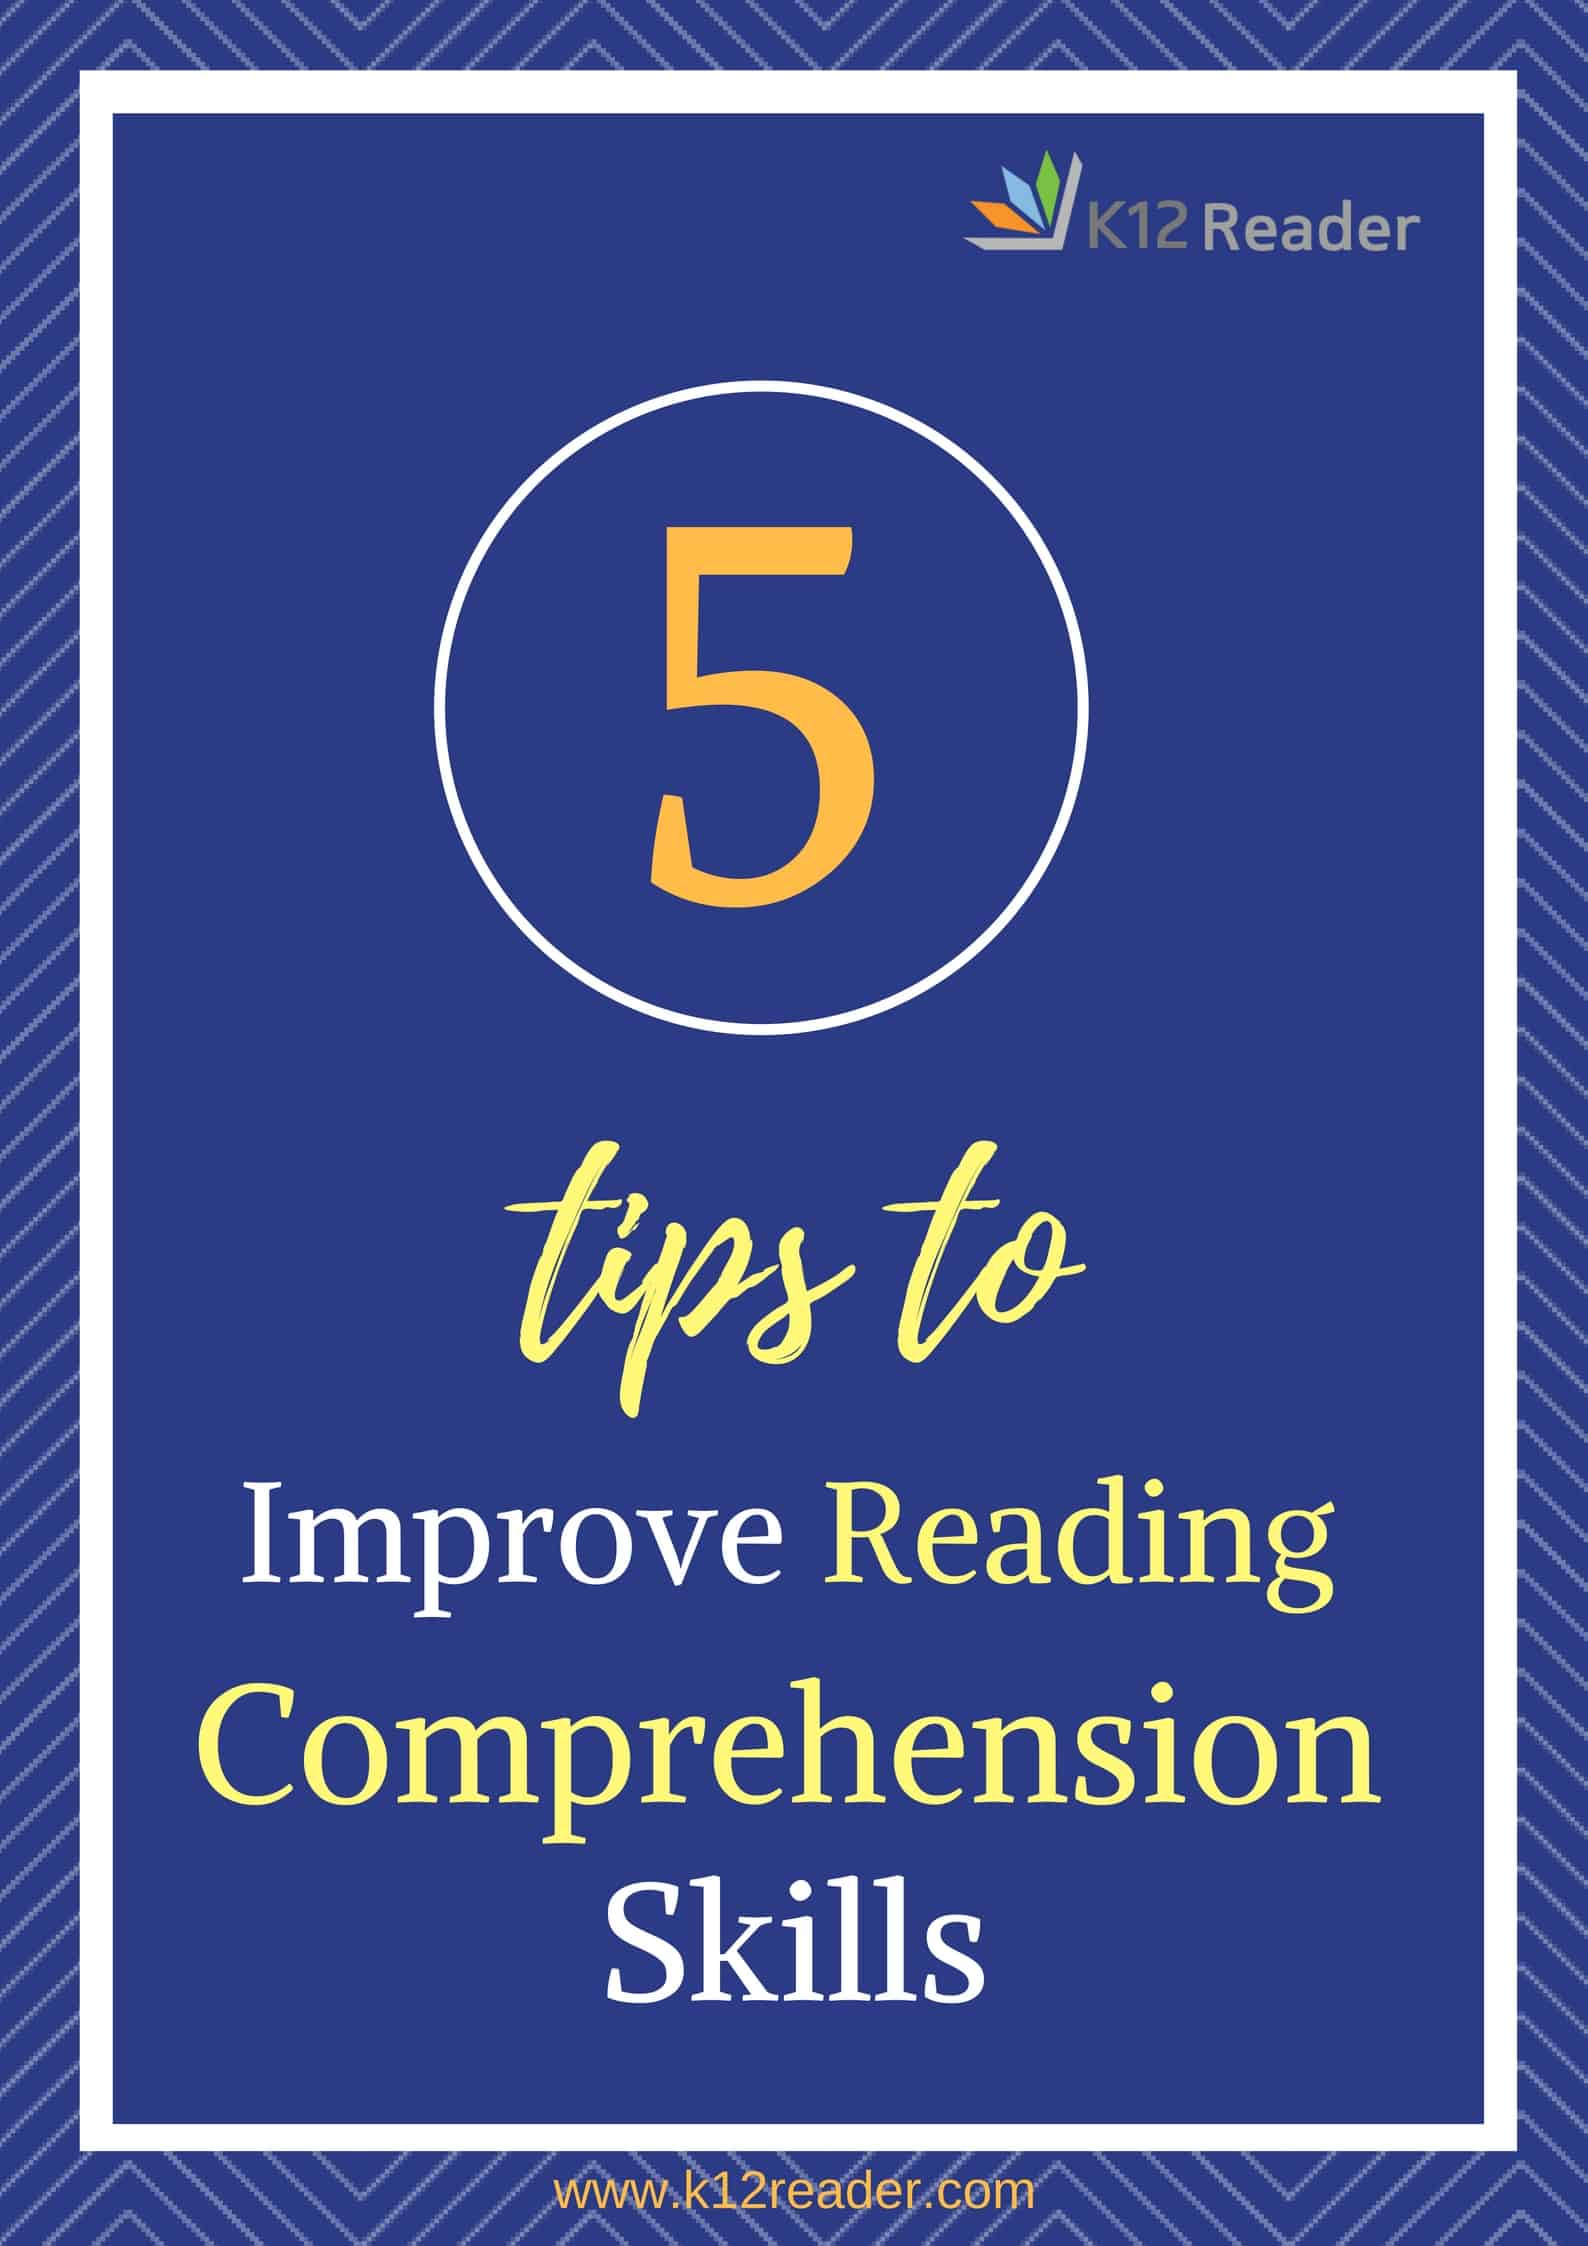 5 Tips to Improve Reading Comprehension Skills